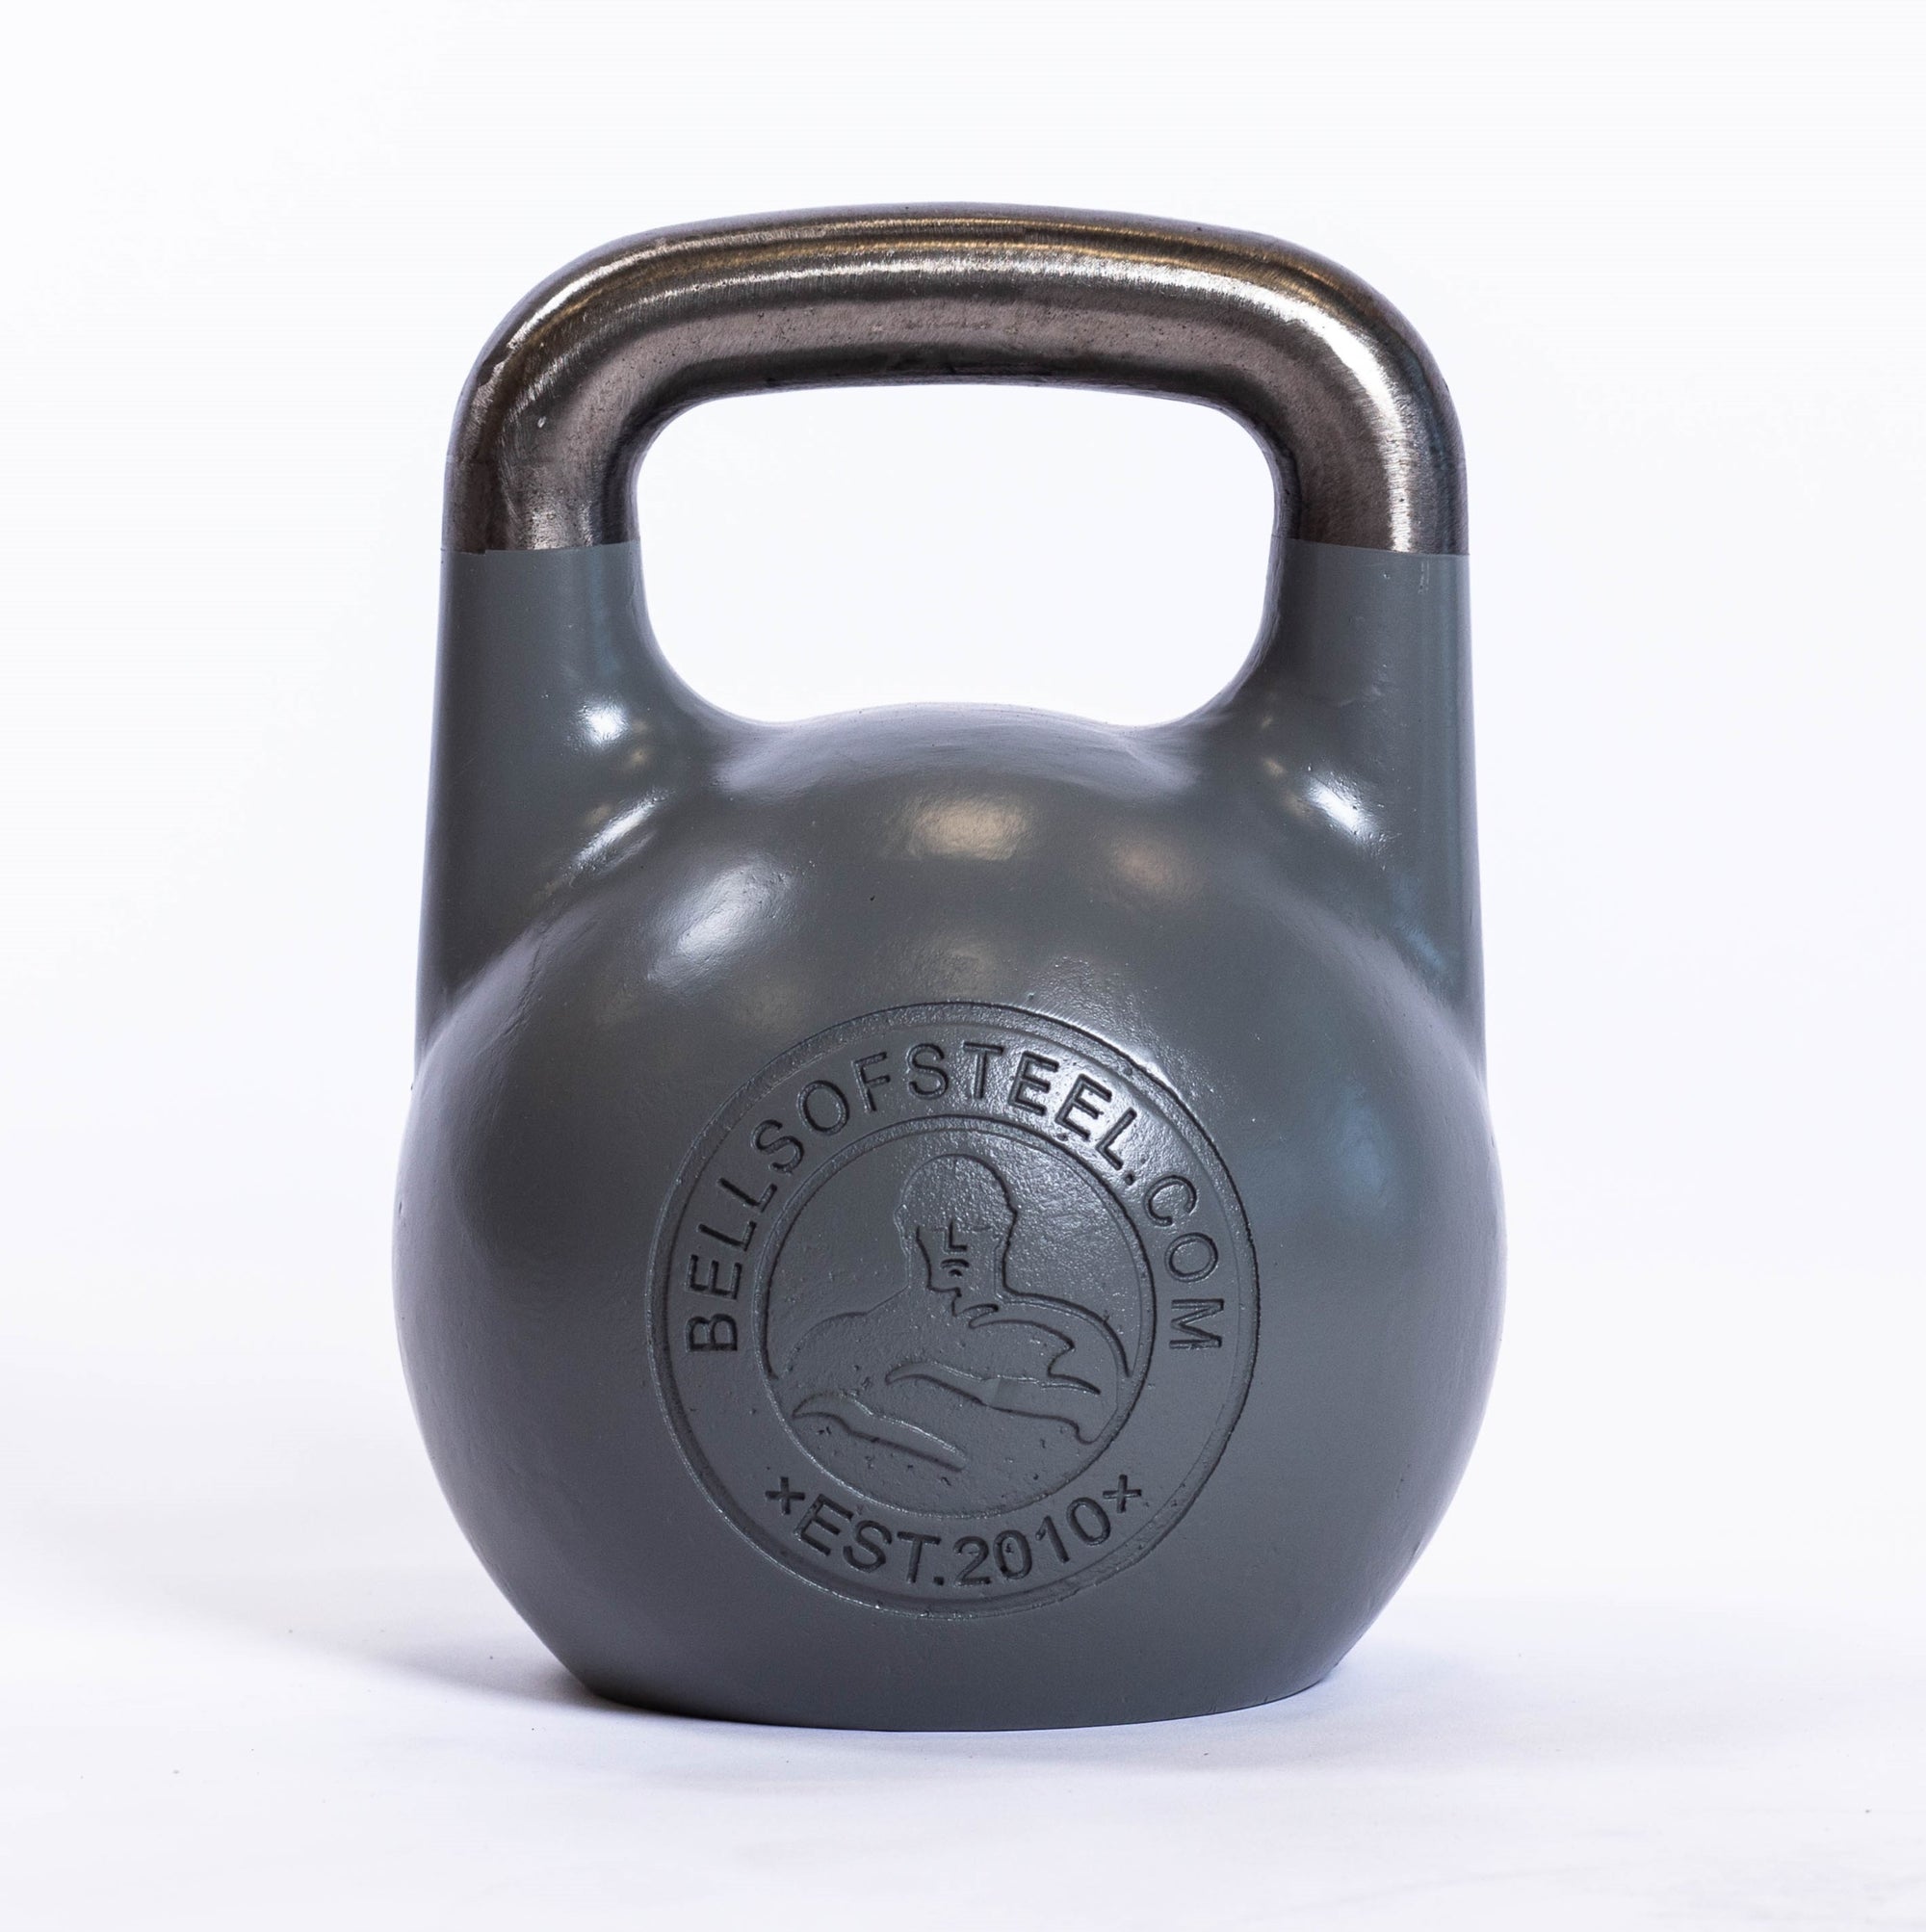 Bells Of Steel Competition Kettlebell